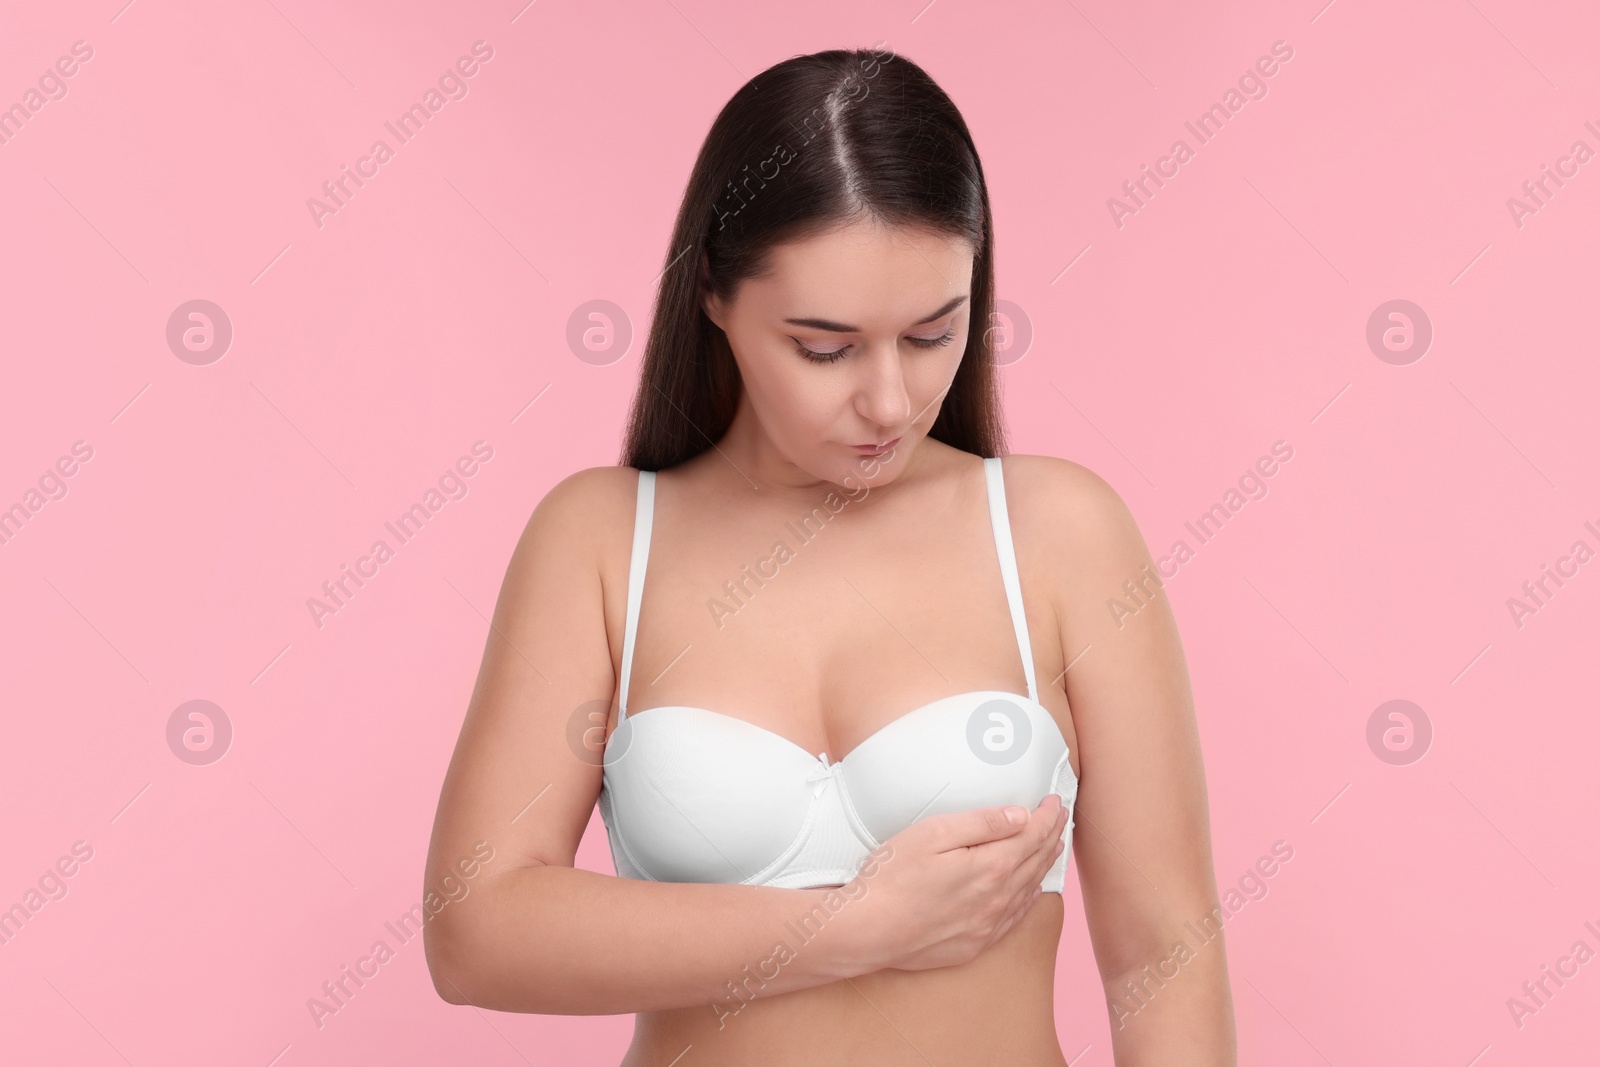 Photo of Mammology. Woman in bra doing breast self-examination on pink background